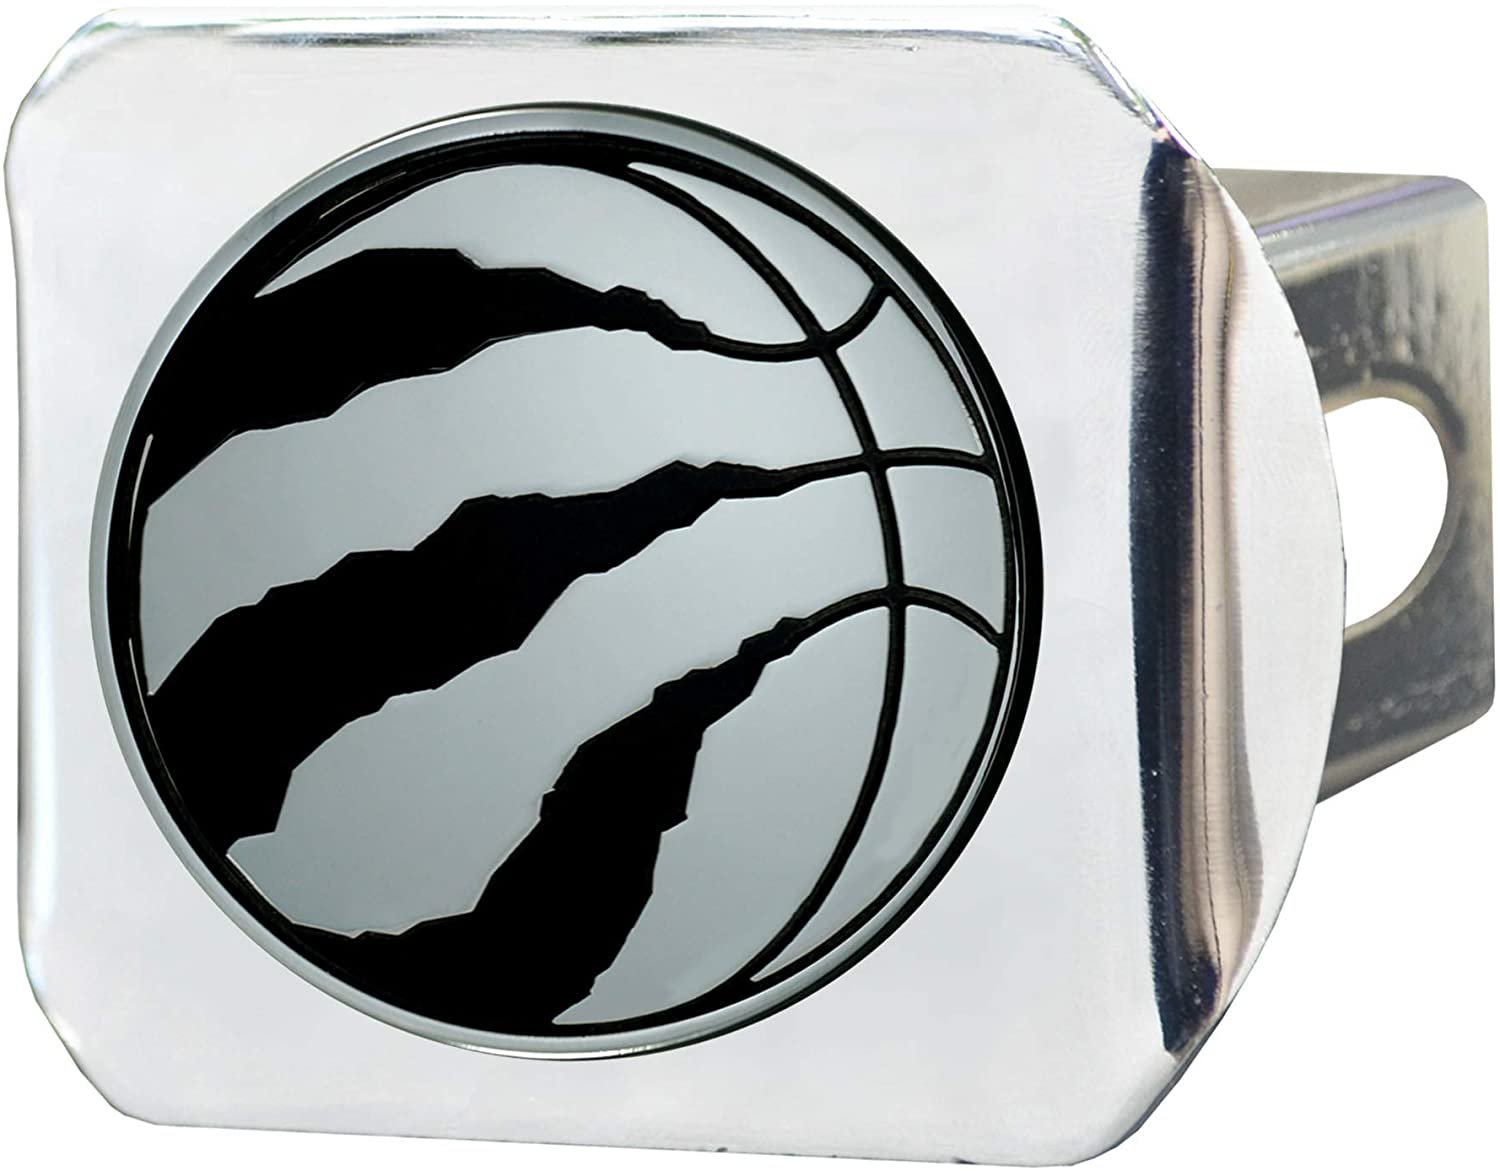 Toronto Raptors Hitch Cover Solid Metal with Raised Chrome Metal Emblem 2" Square Type III